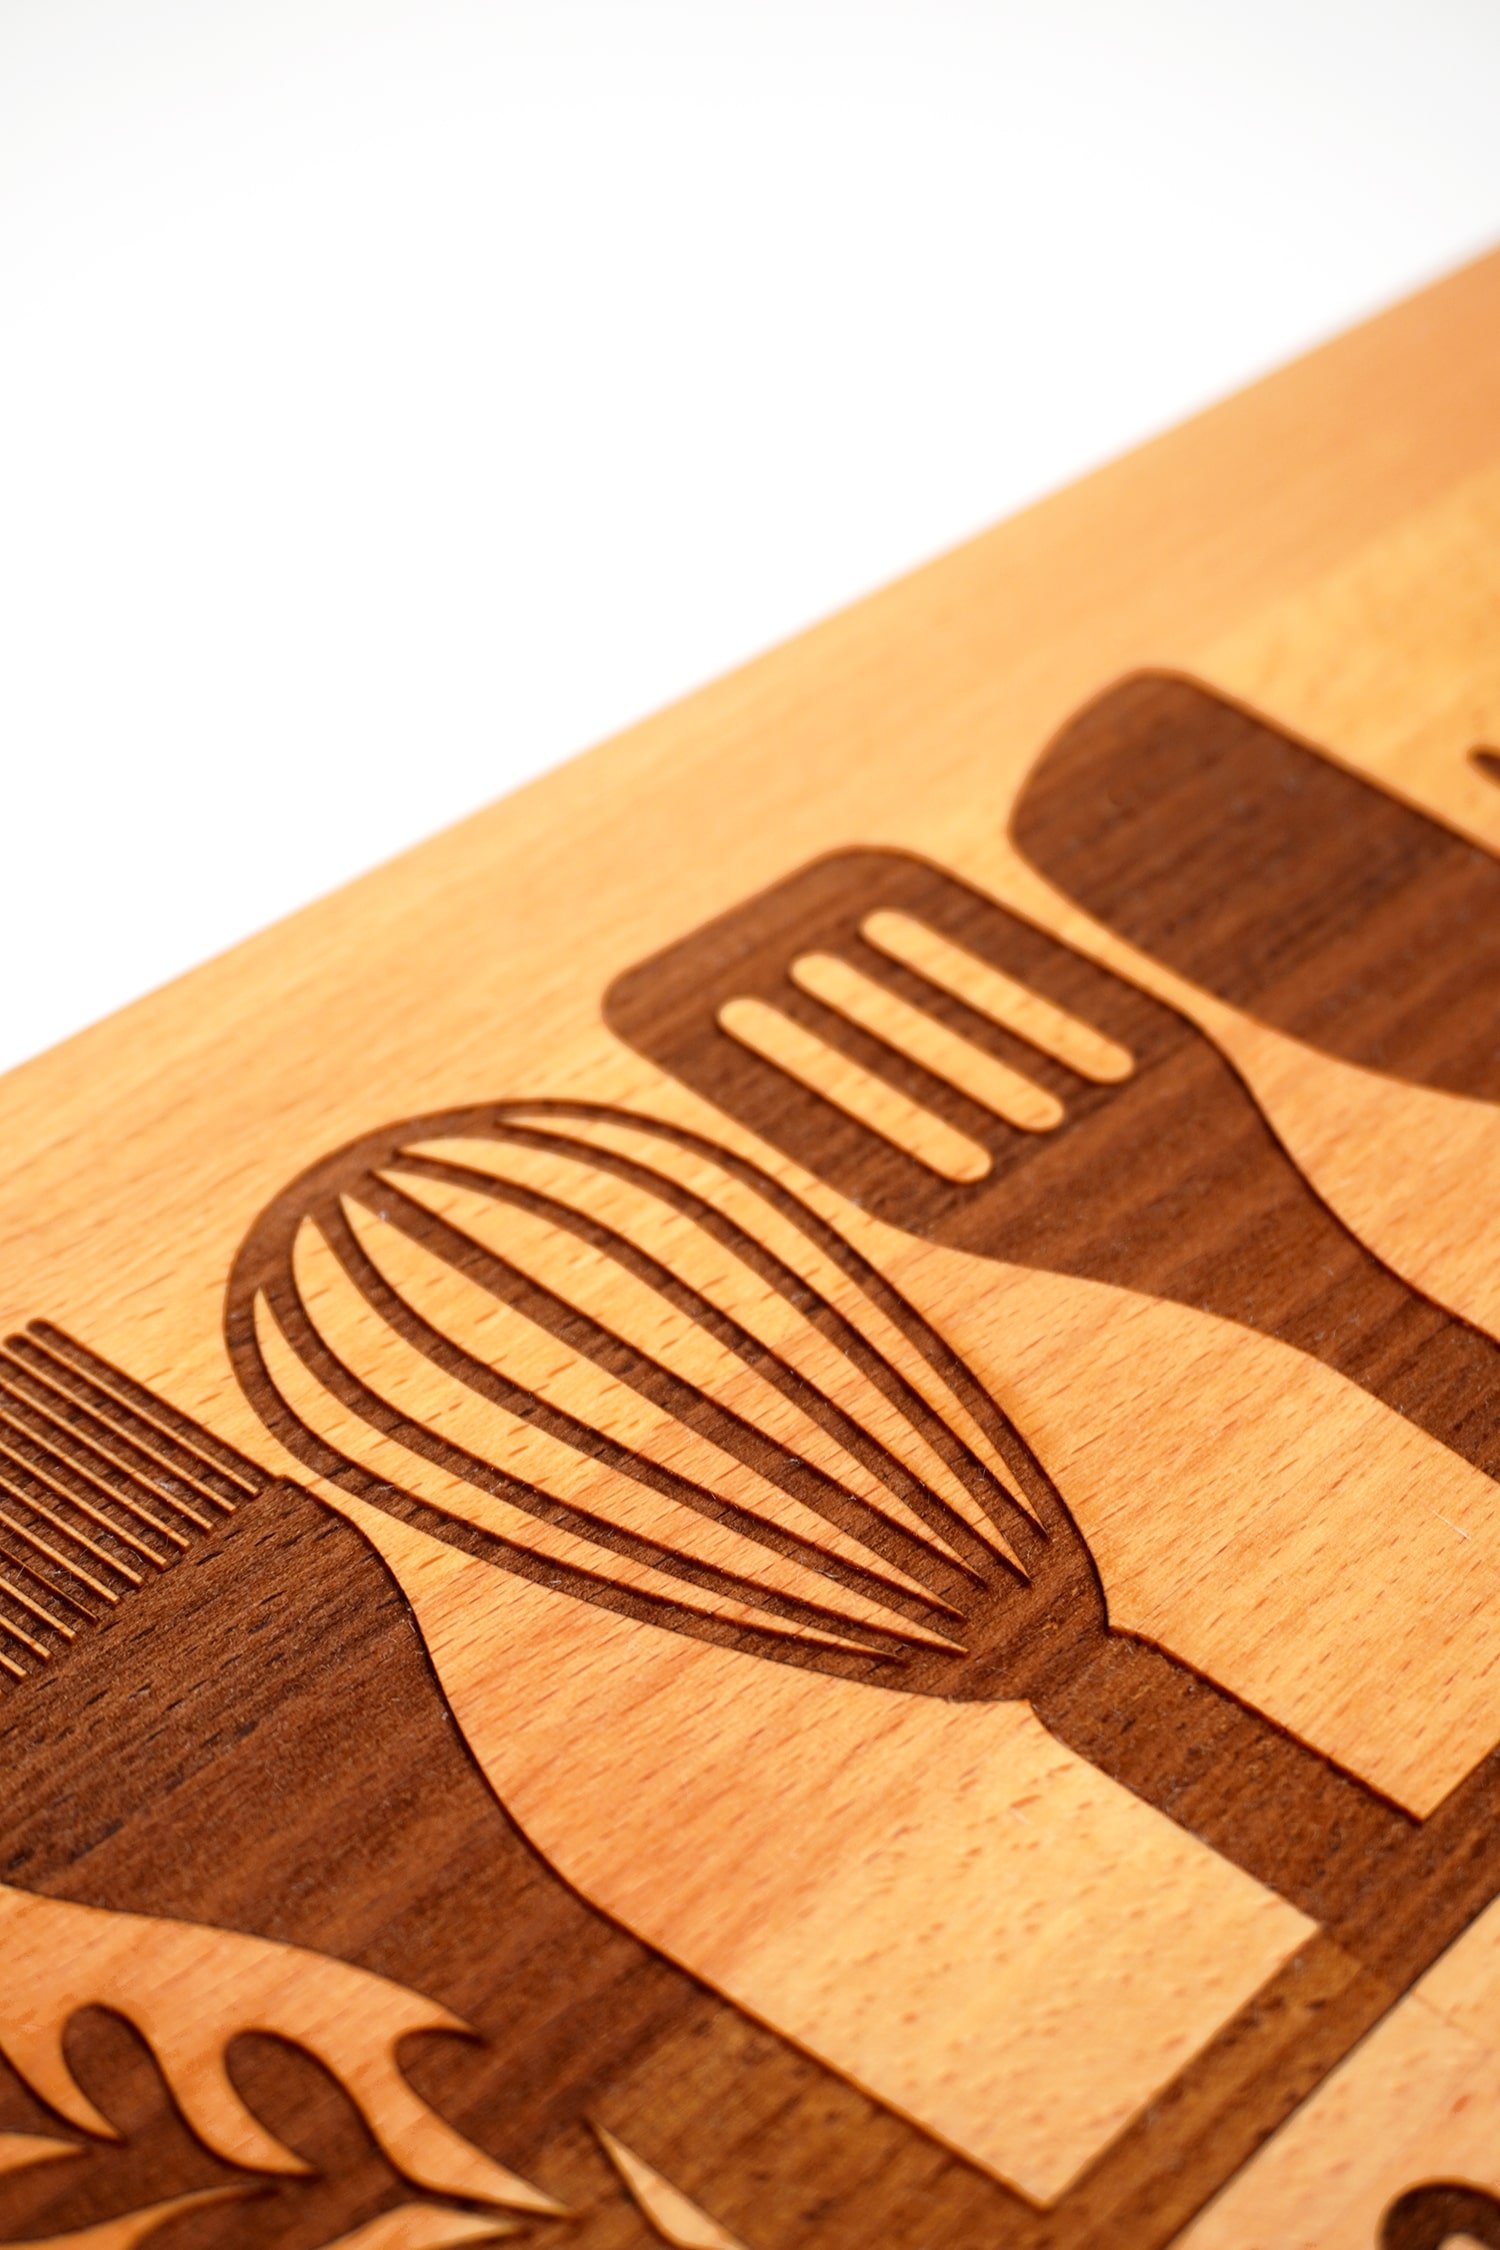 Close up detail of Glowforge engraved cutting board